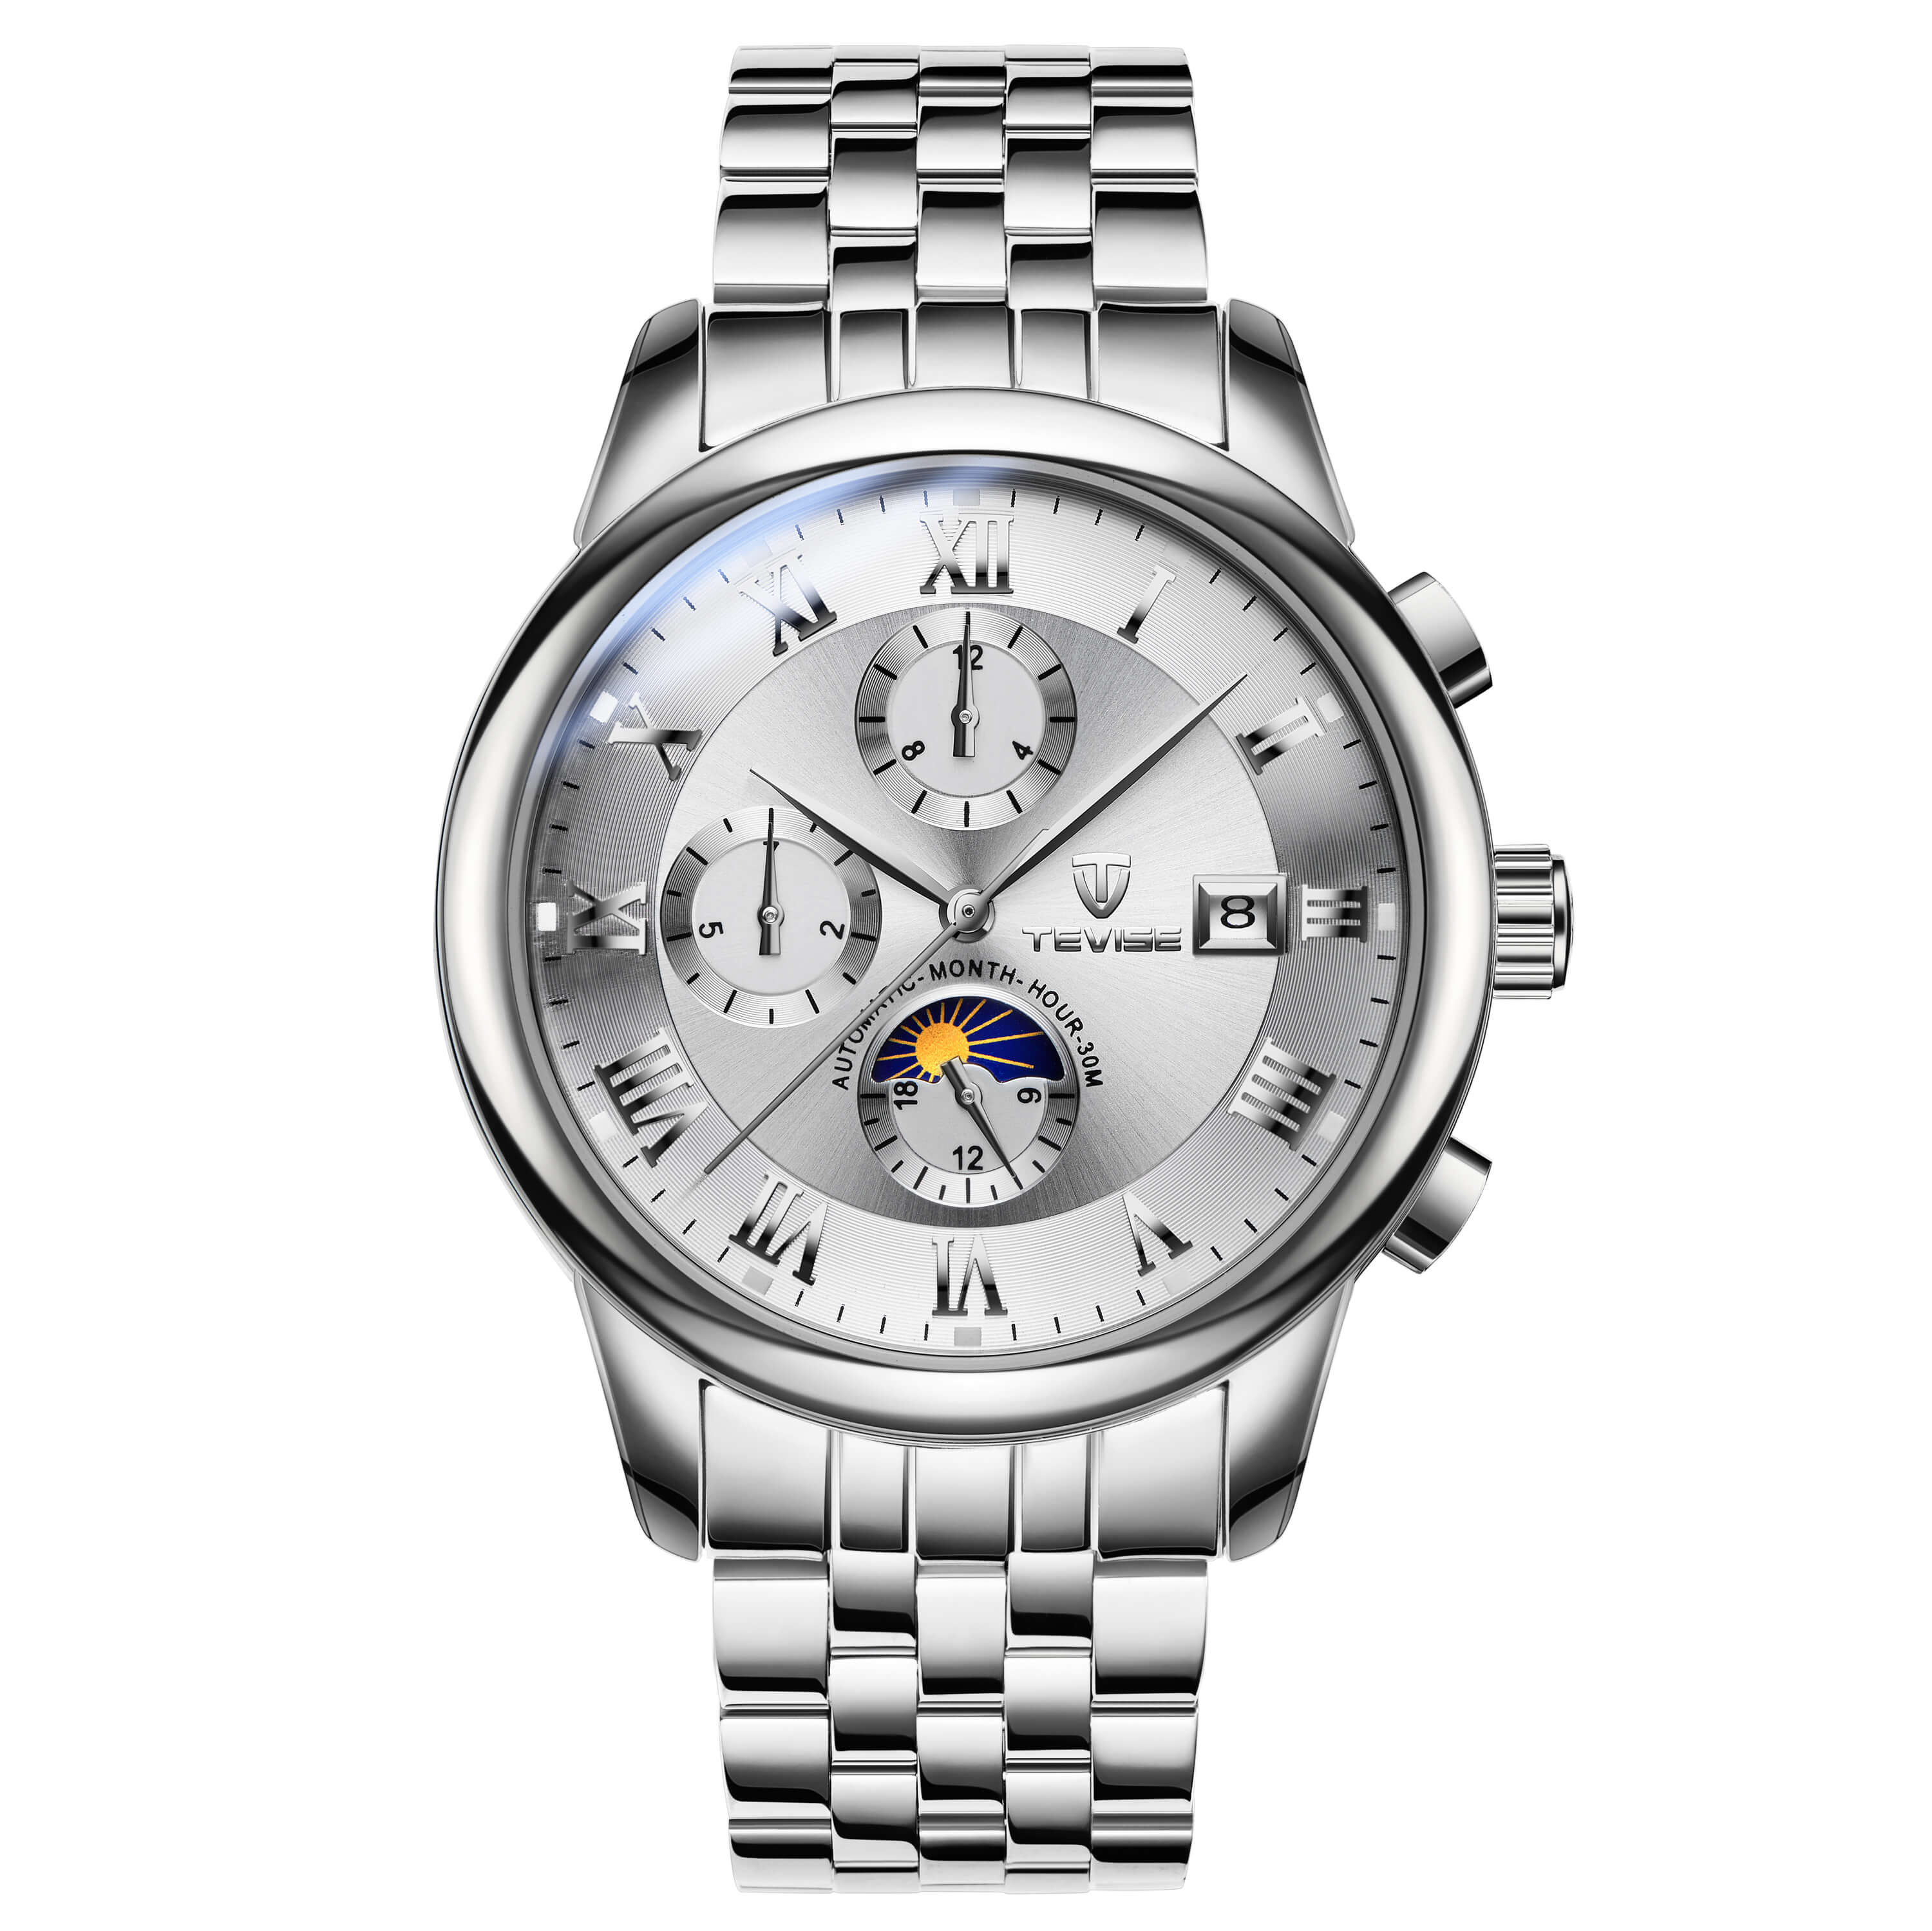 TEVISE 9008 Men's Automatic Mechanical Men's Watch Moon Phase Stainless Steel - Silver Black